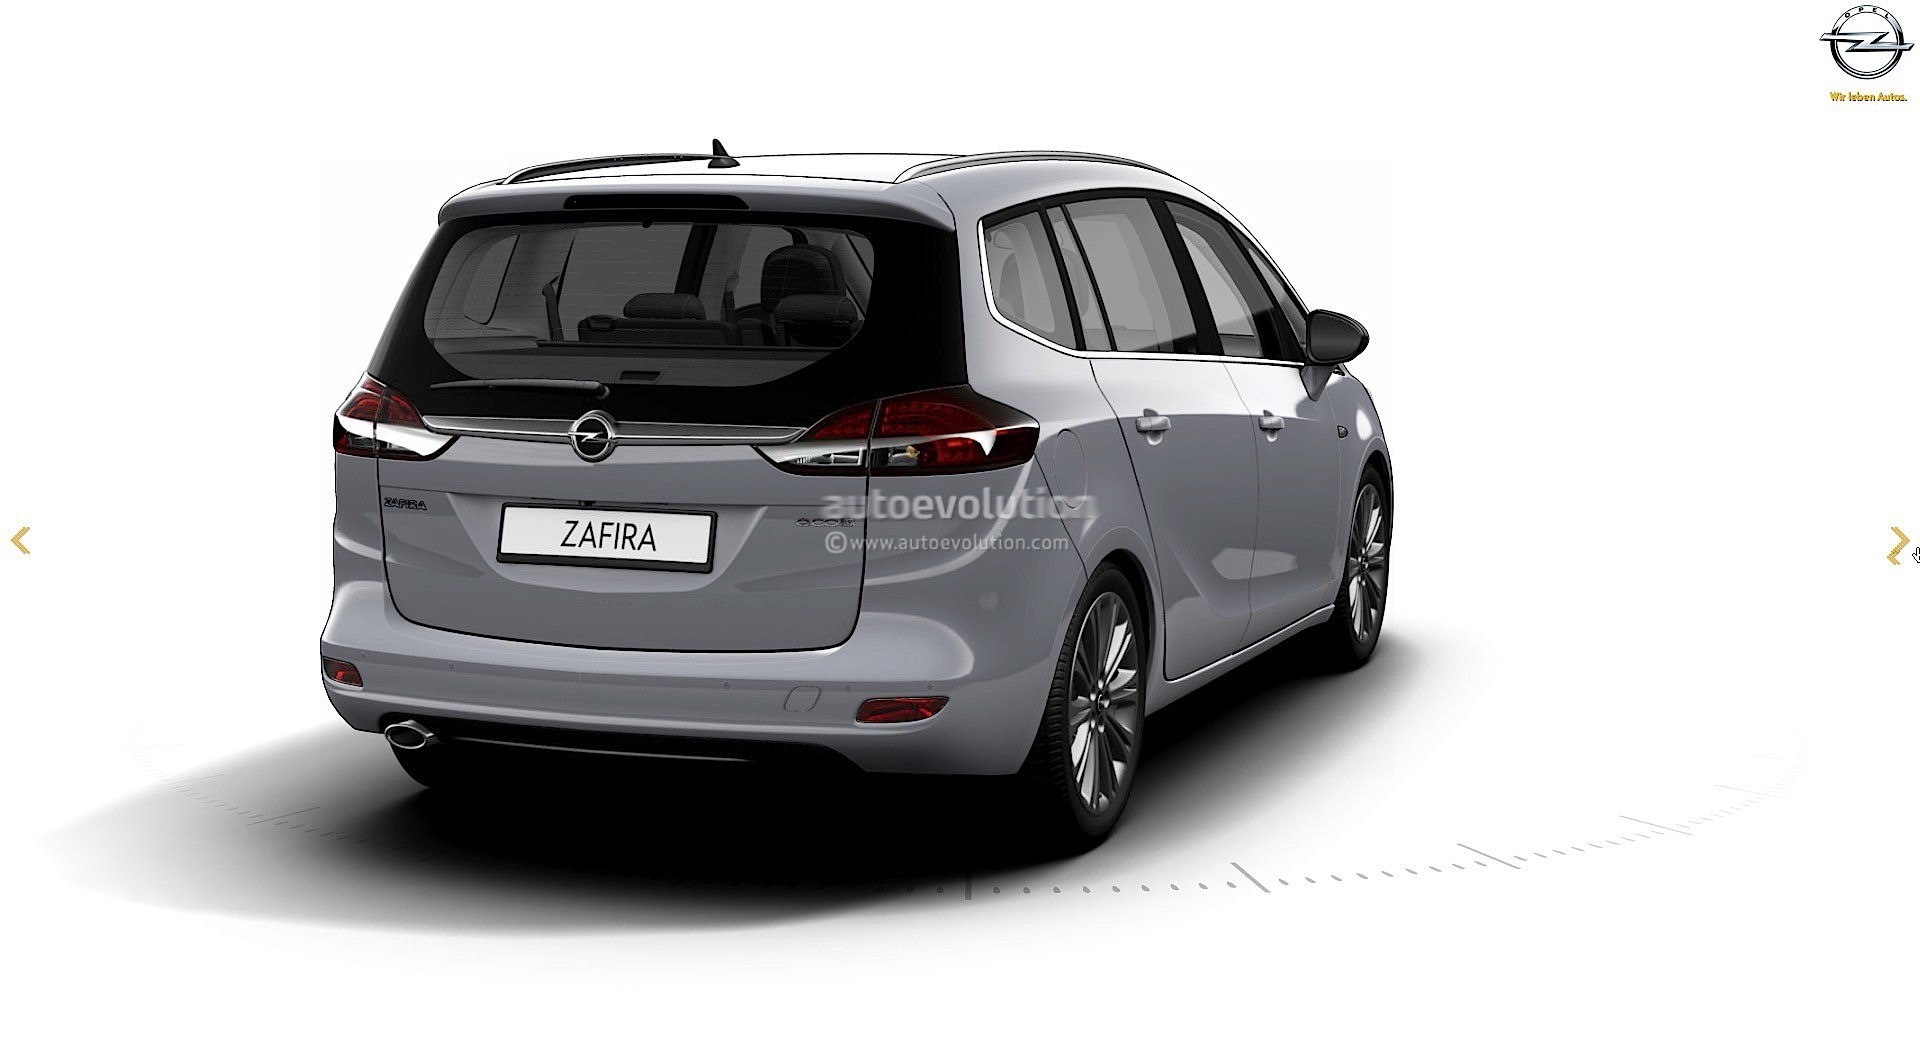 2017-opel-zafira-facelift-leaked-on-gm-website-here-are-the-first-pics_9-autonovosti.me-8